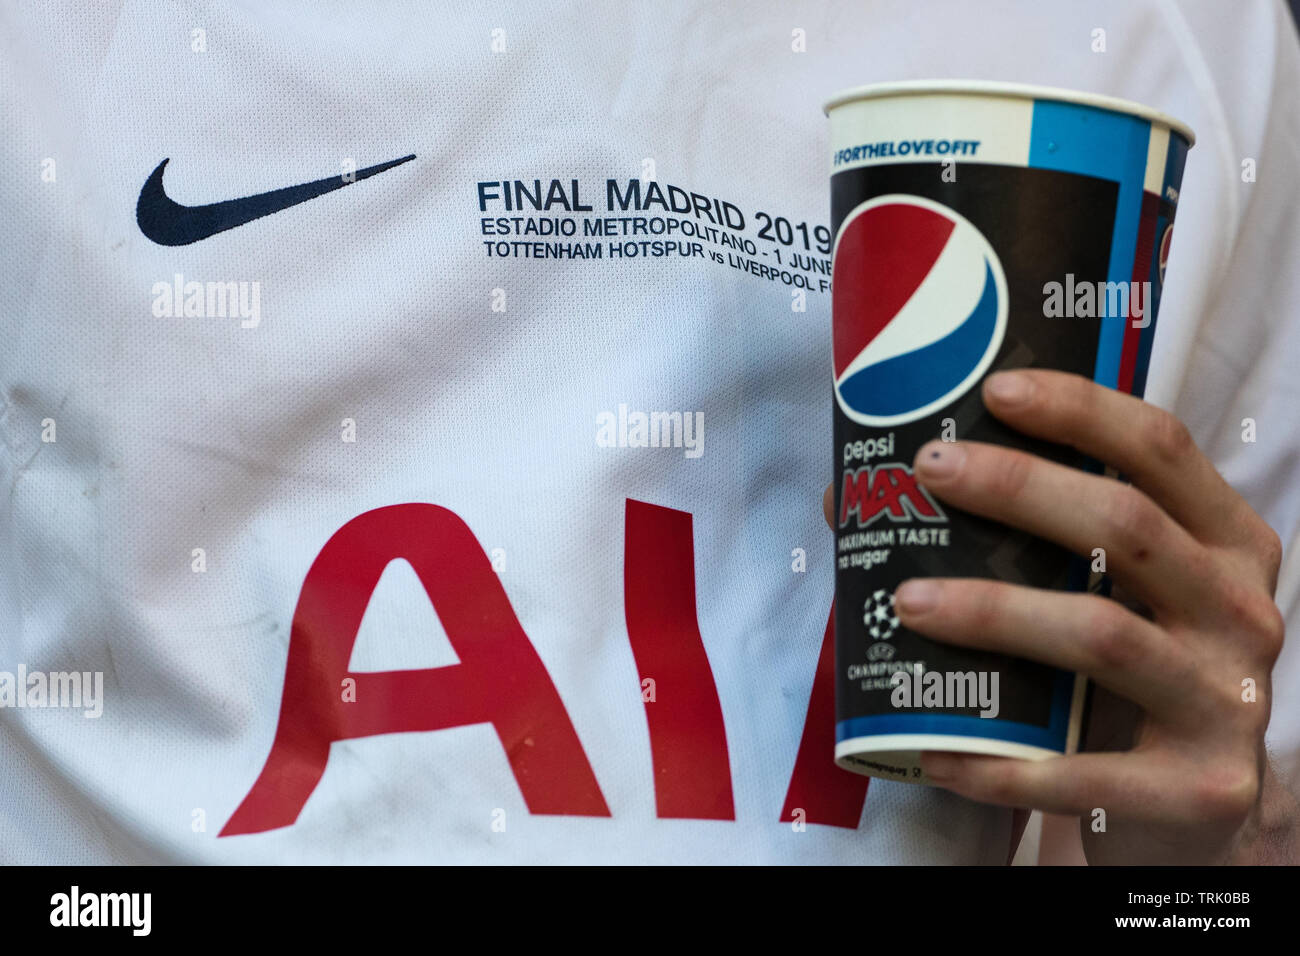 CL FINAL 2019 replica Spurs shirt of supporter ahead of the UEFA Champions League FINAL match between Tottenham Hotspur and Liverpool at the Metropoli Stock Photo